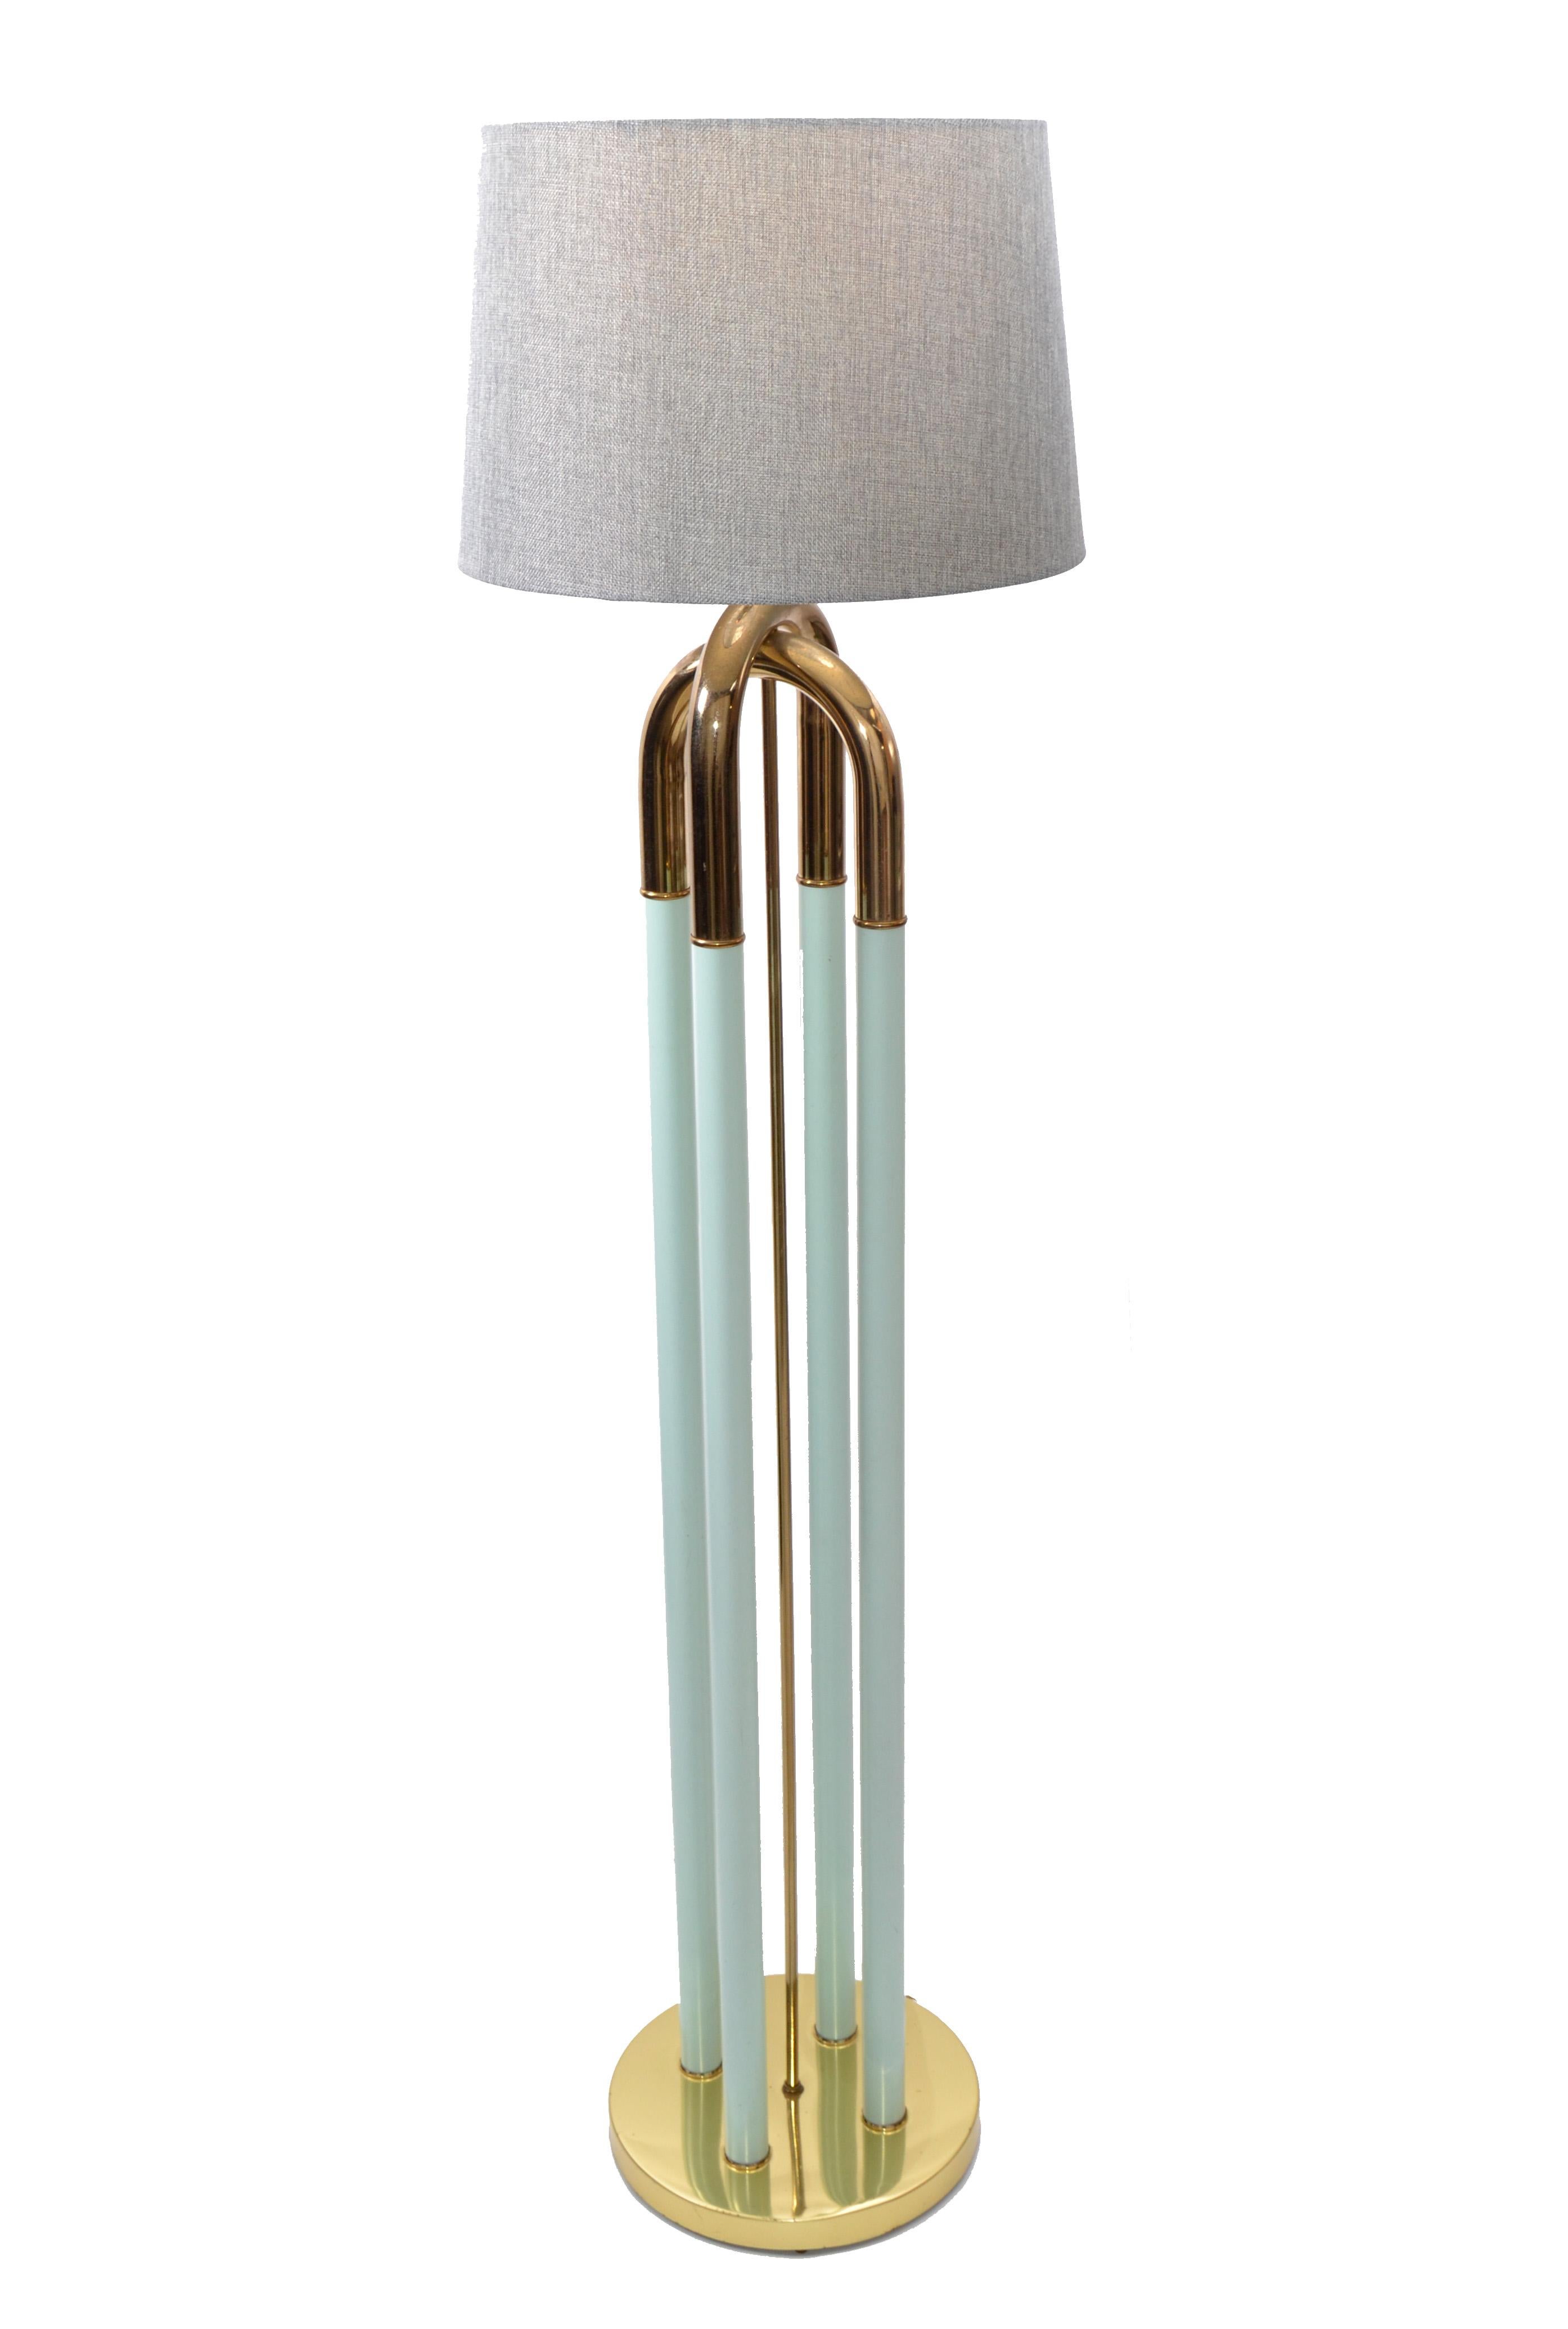 Enamel in Turquoise and plated brass floor lamp Mid-Century Modern.
Takes one light bulb with max. 75 watts. LED bulb works perfect.
No shade.